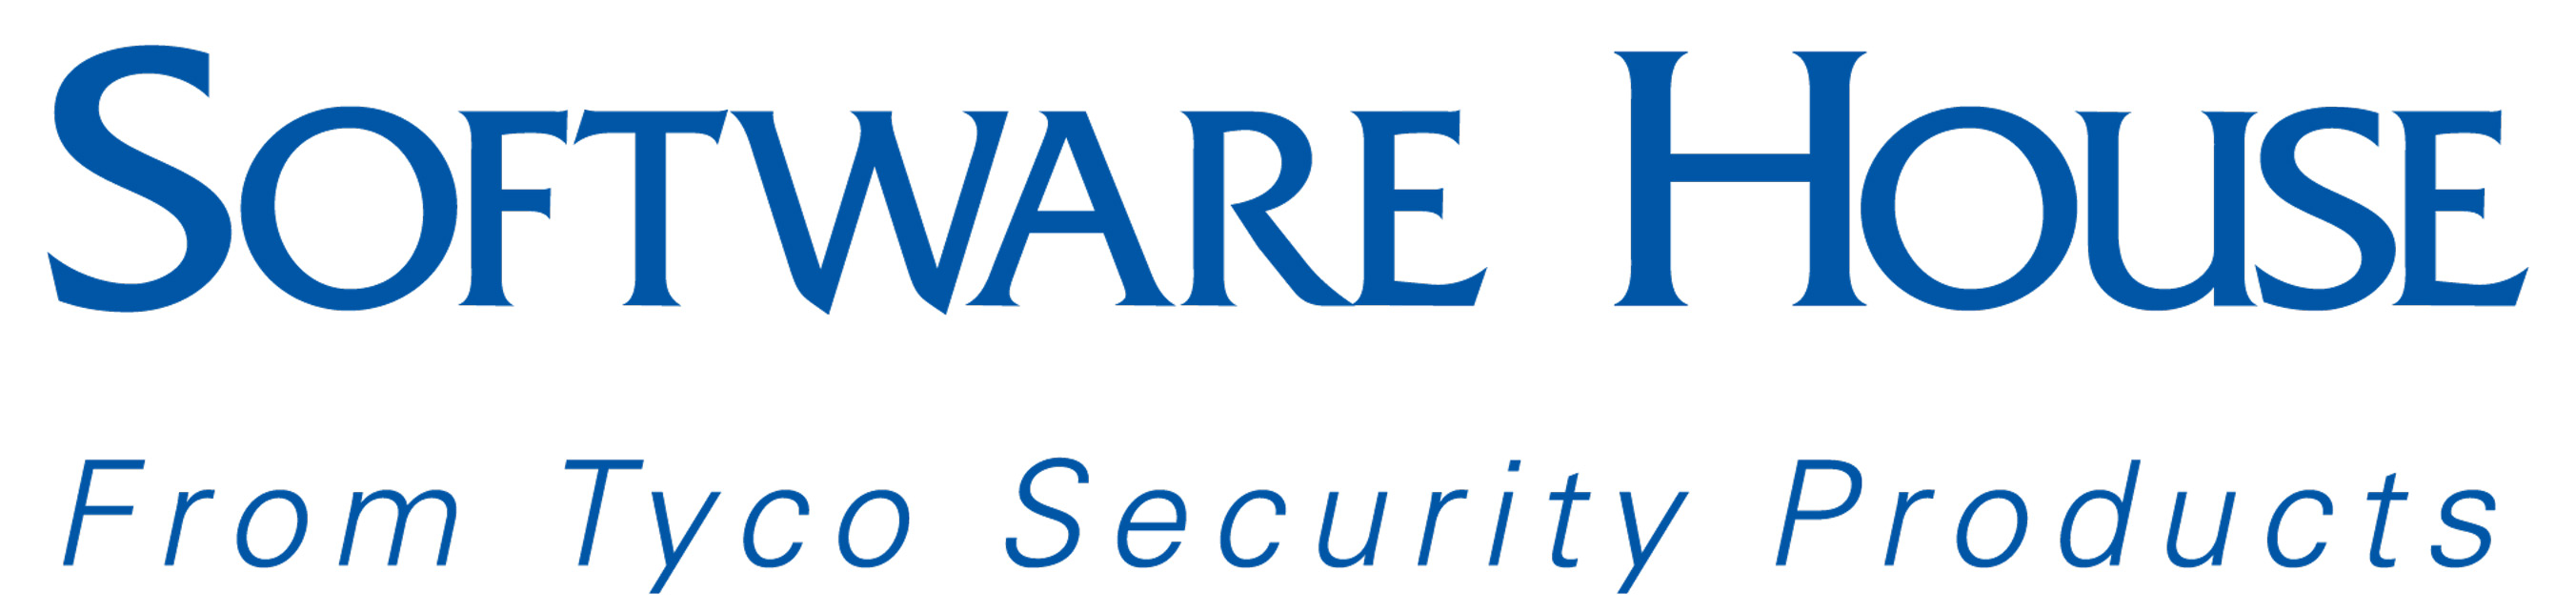 Software House Security Products